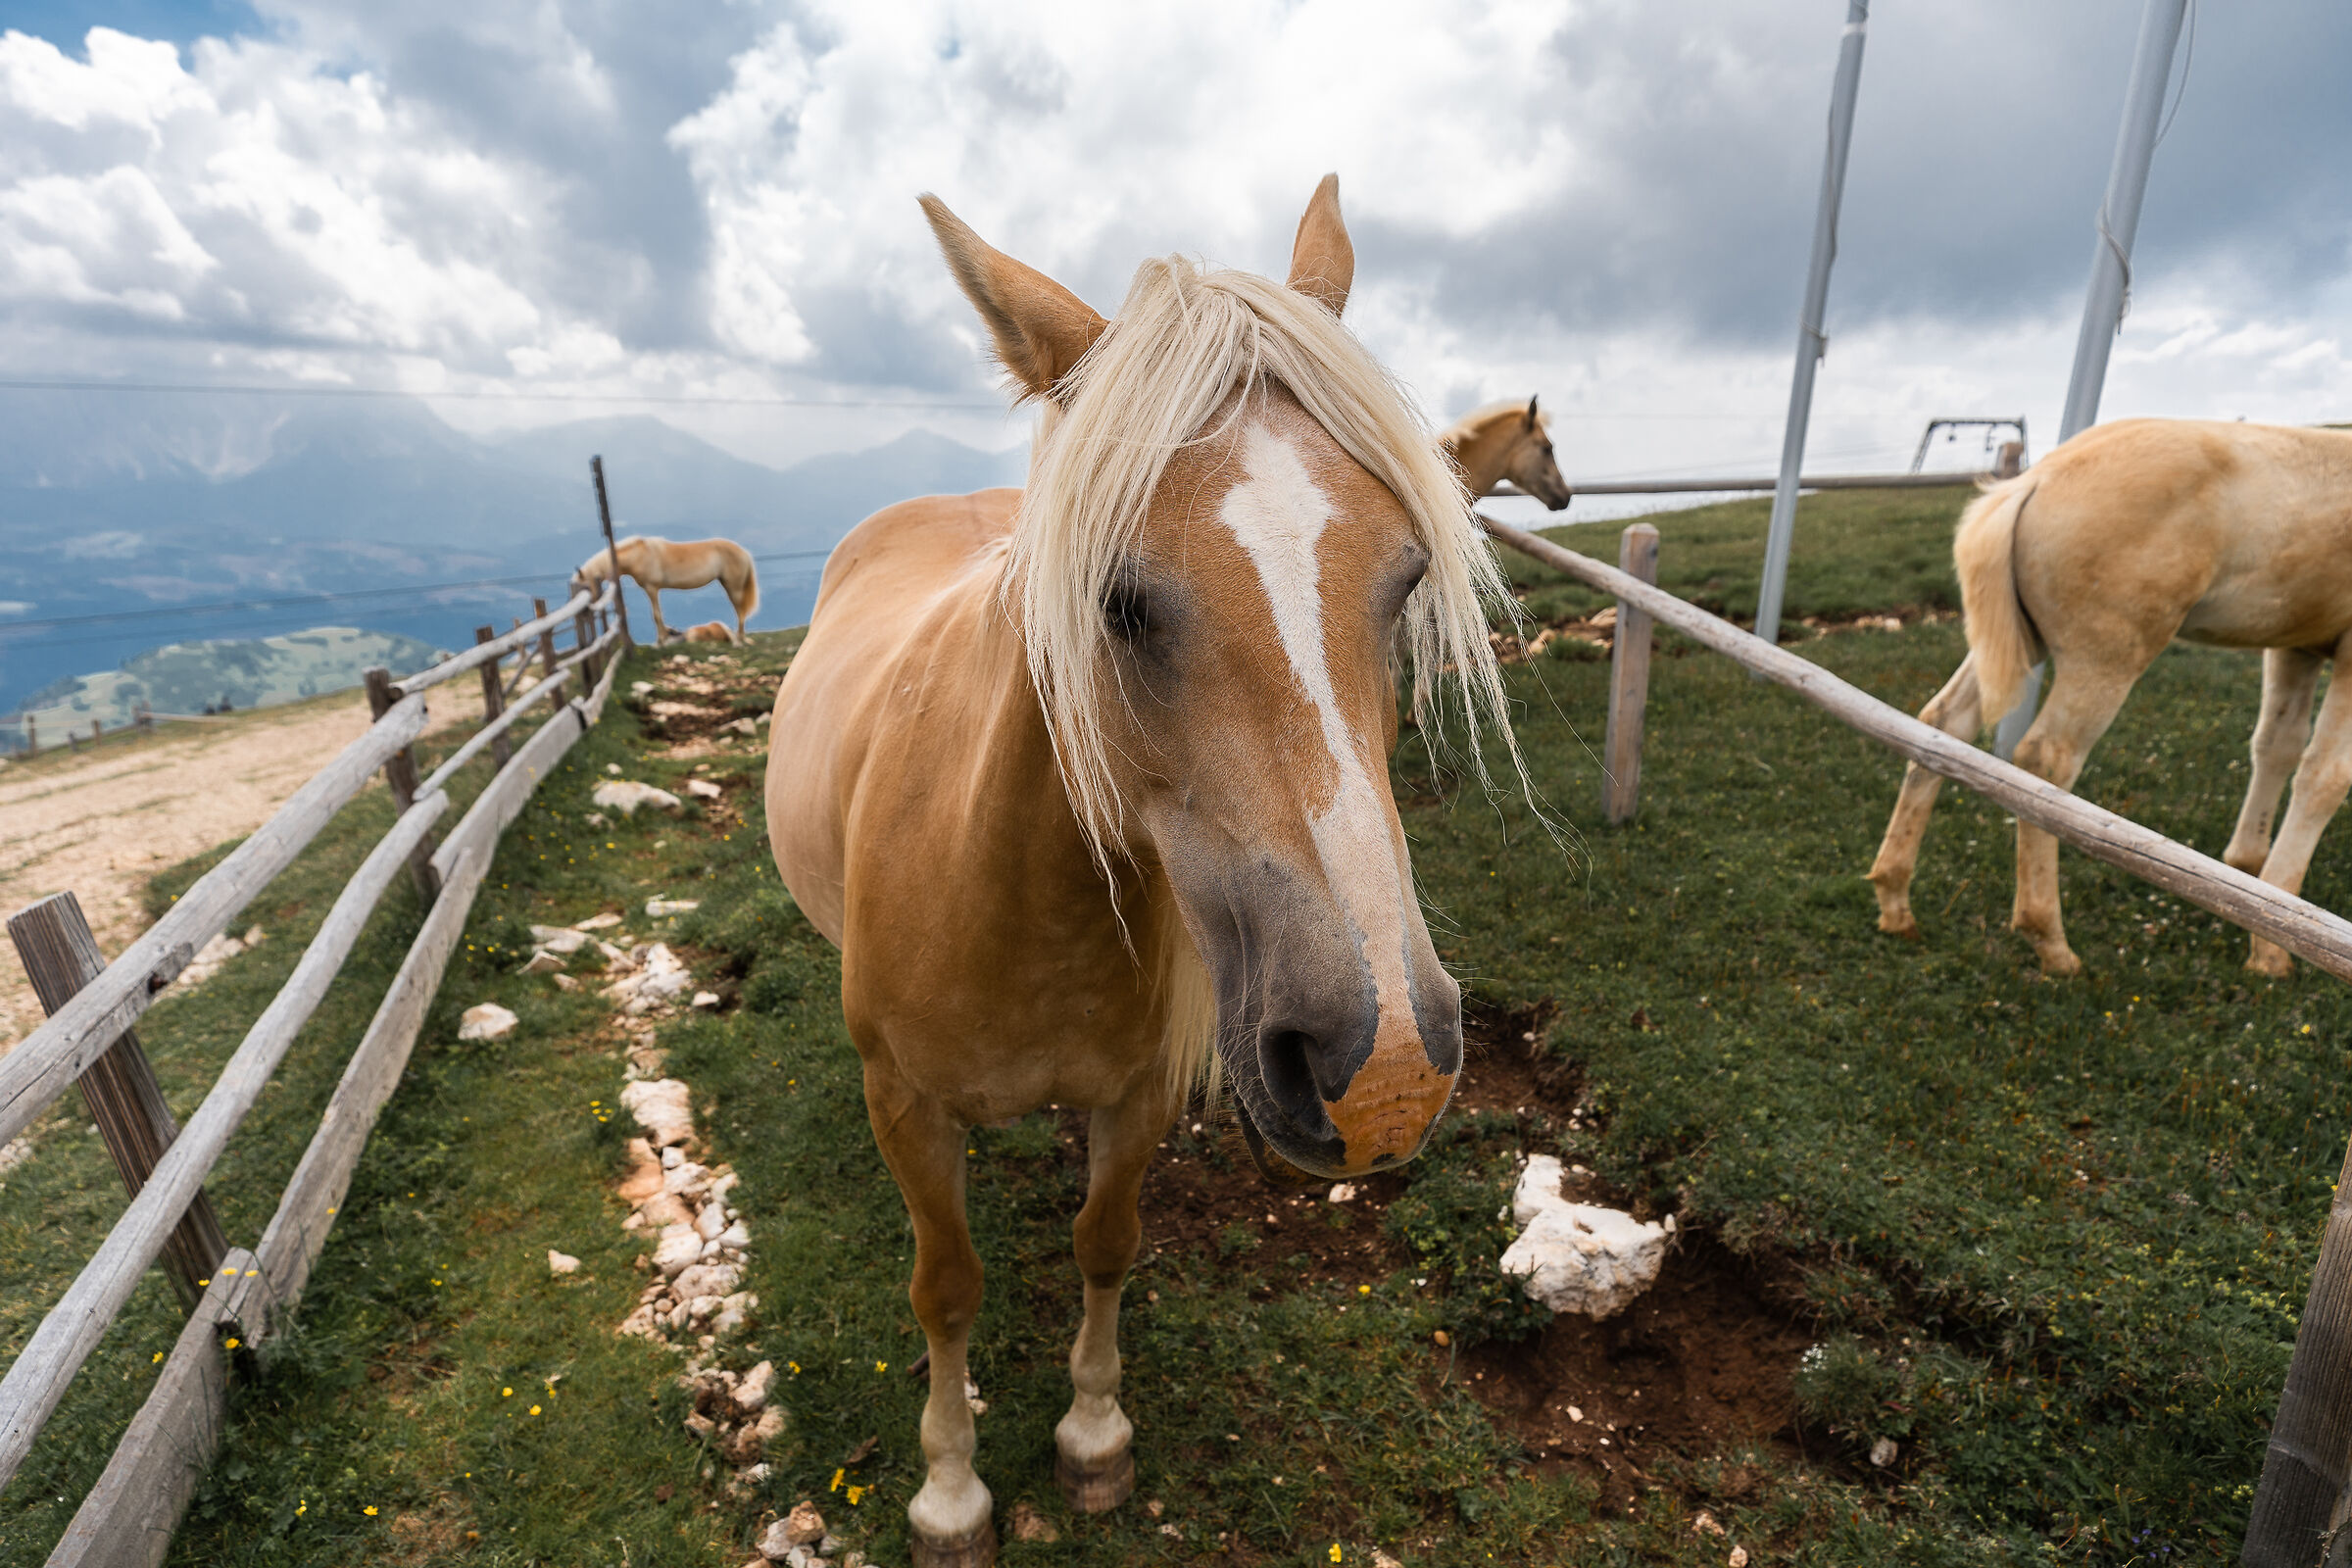 Horses in South Tyrol...